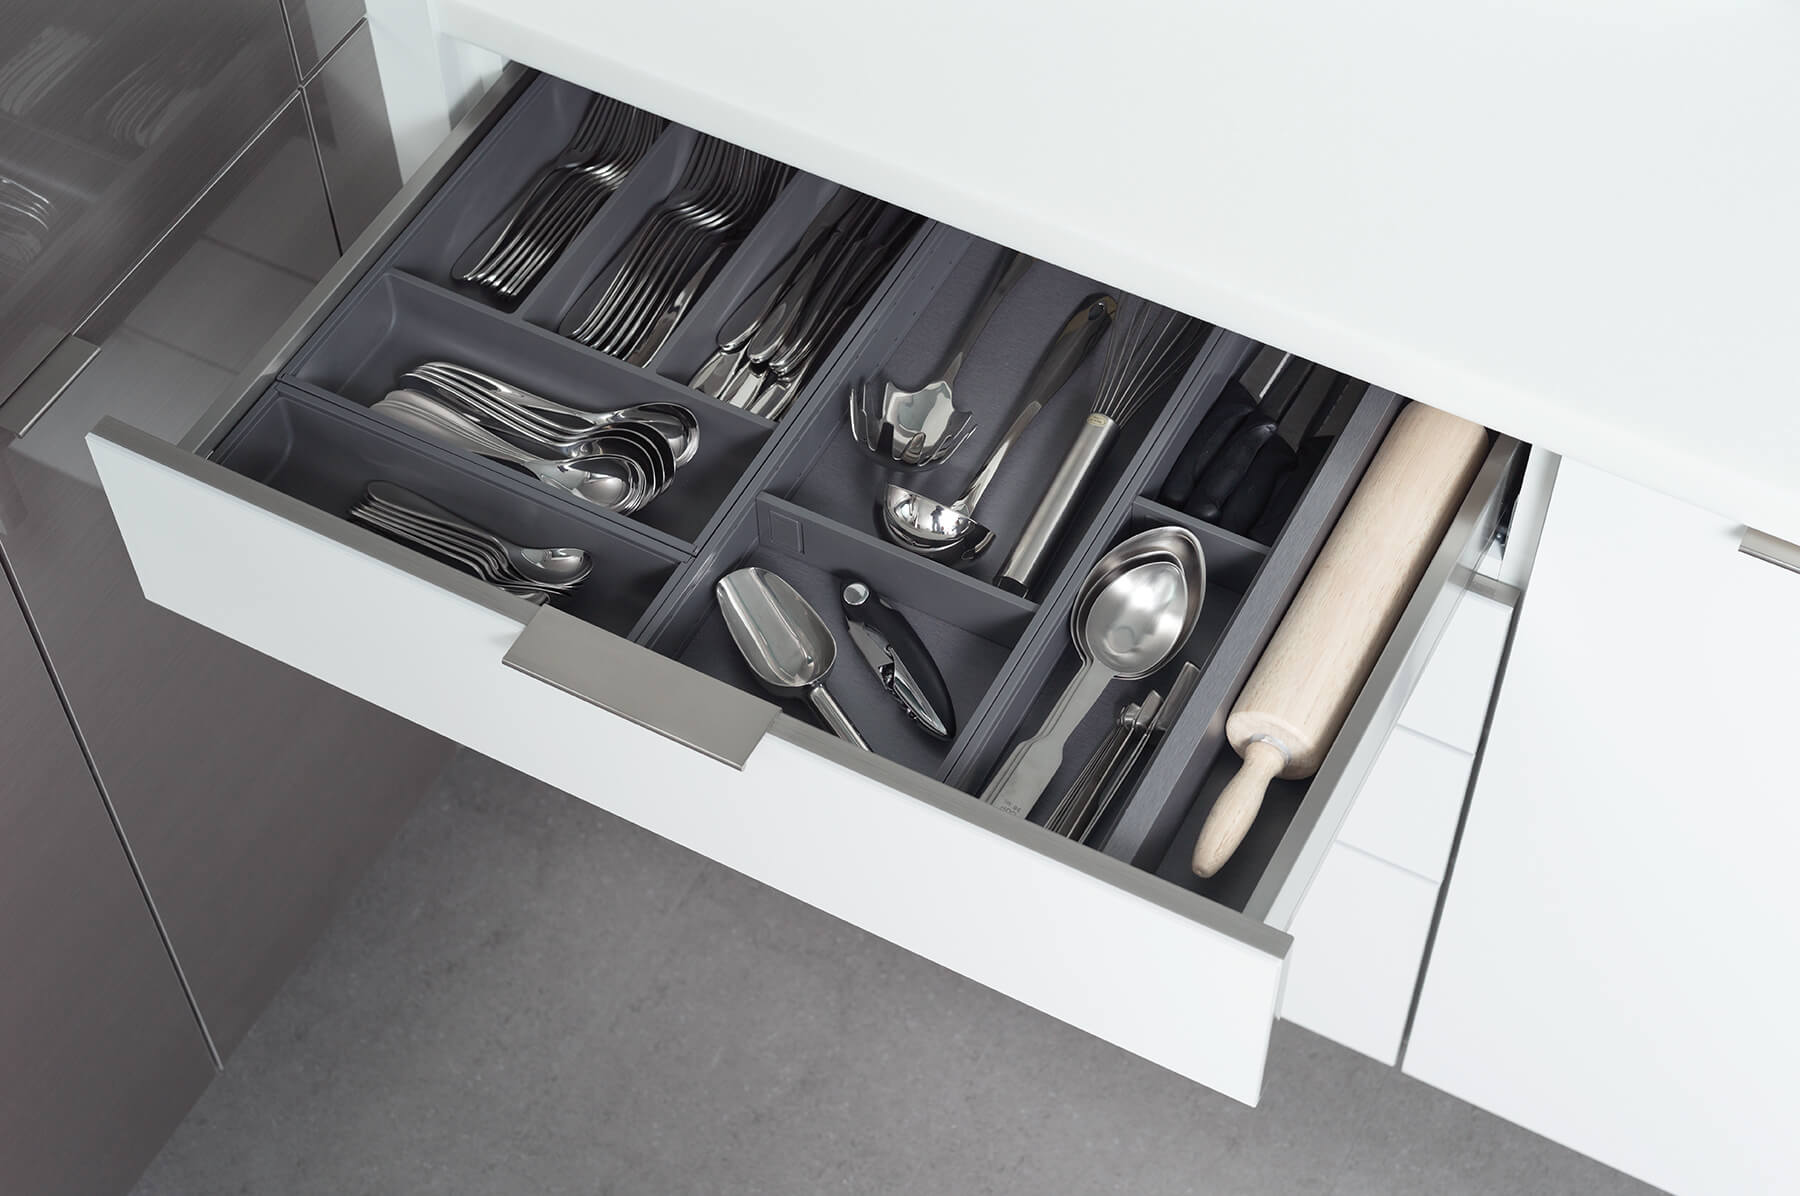 A sleek stainless steel drawer for Dura Supreme kitchen cabinets with metal dividers and organizers for utensil storage and misc. kitchen storage.